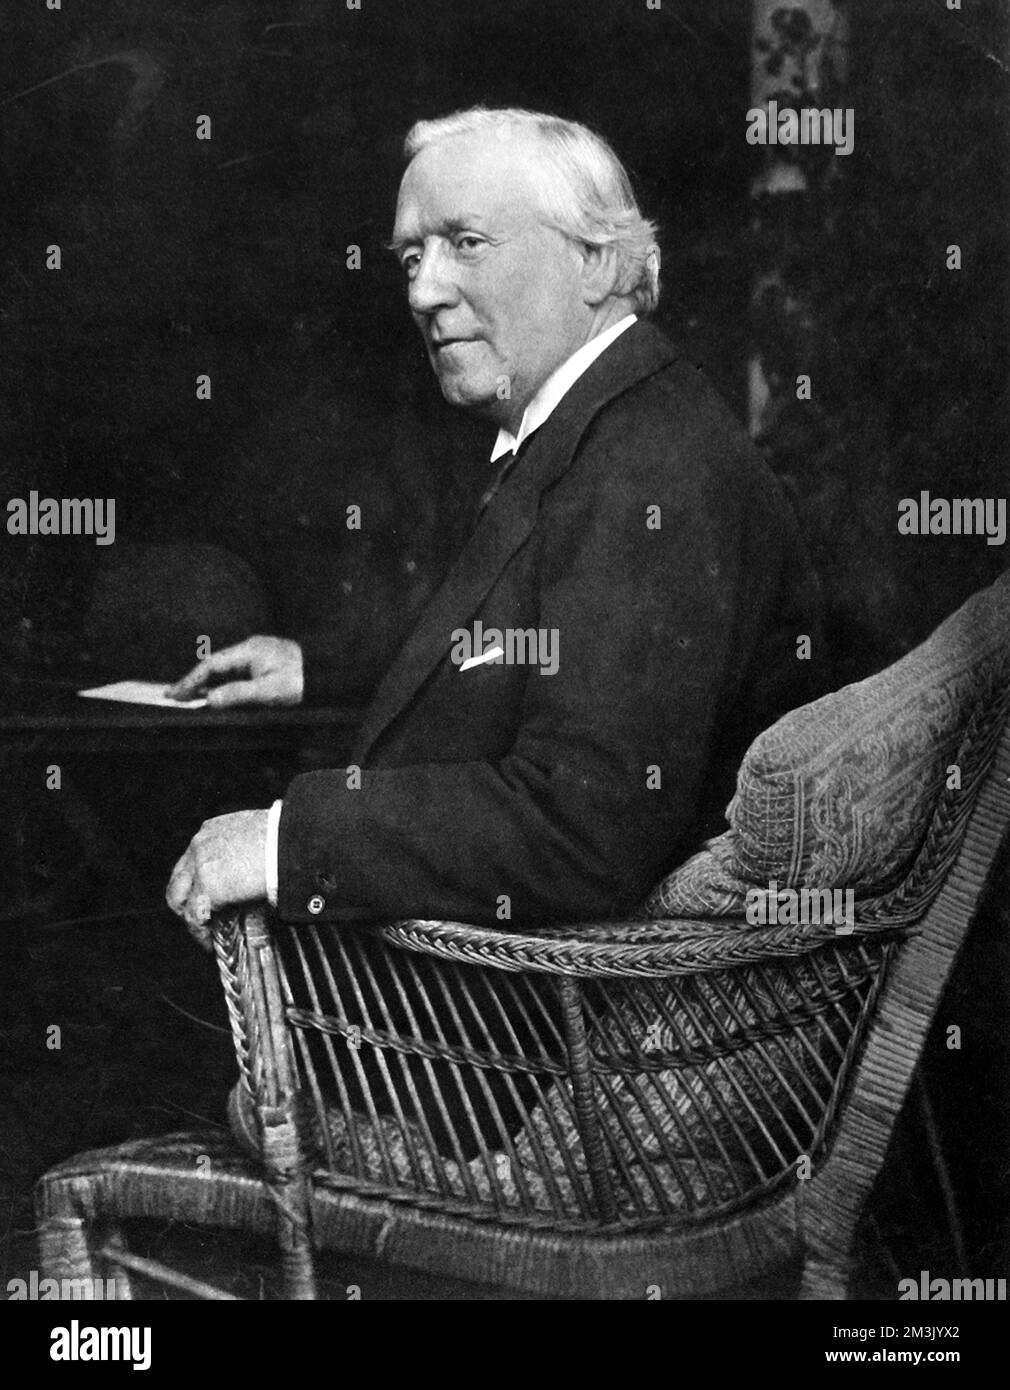 Herbert Henry Asquith, 1st Earl of Oxford &amp; Asquith, (1852 - 1928), served as QC, Liberal MP for East Fife and Paisley and Prime Minister.  1915 Stock Photo